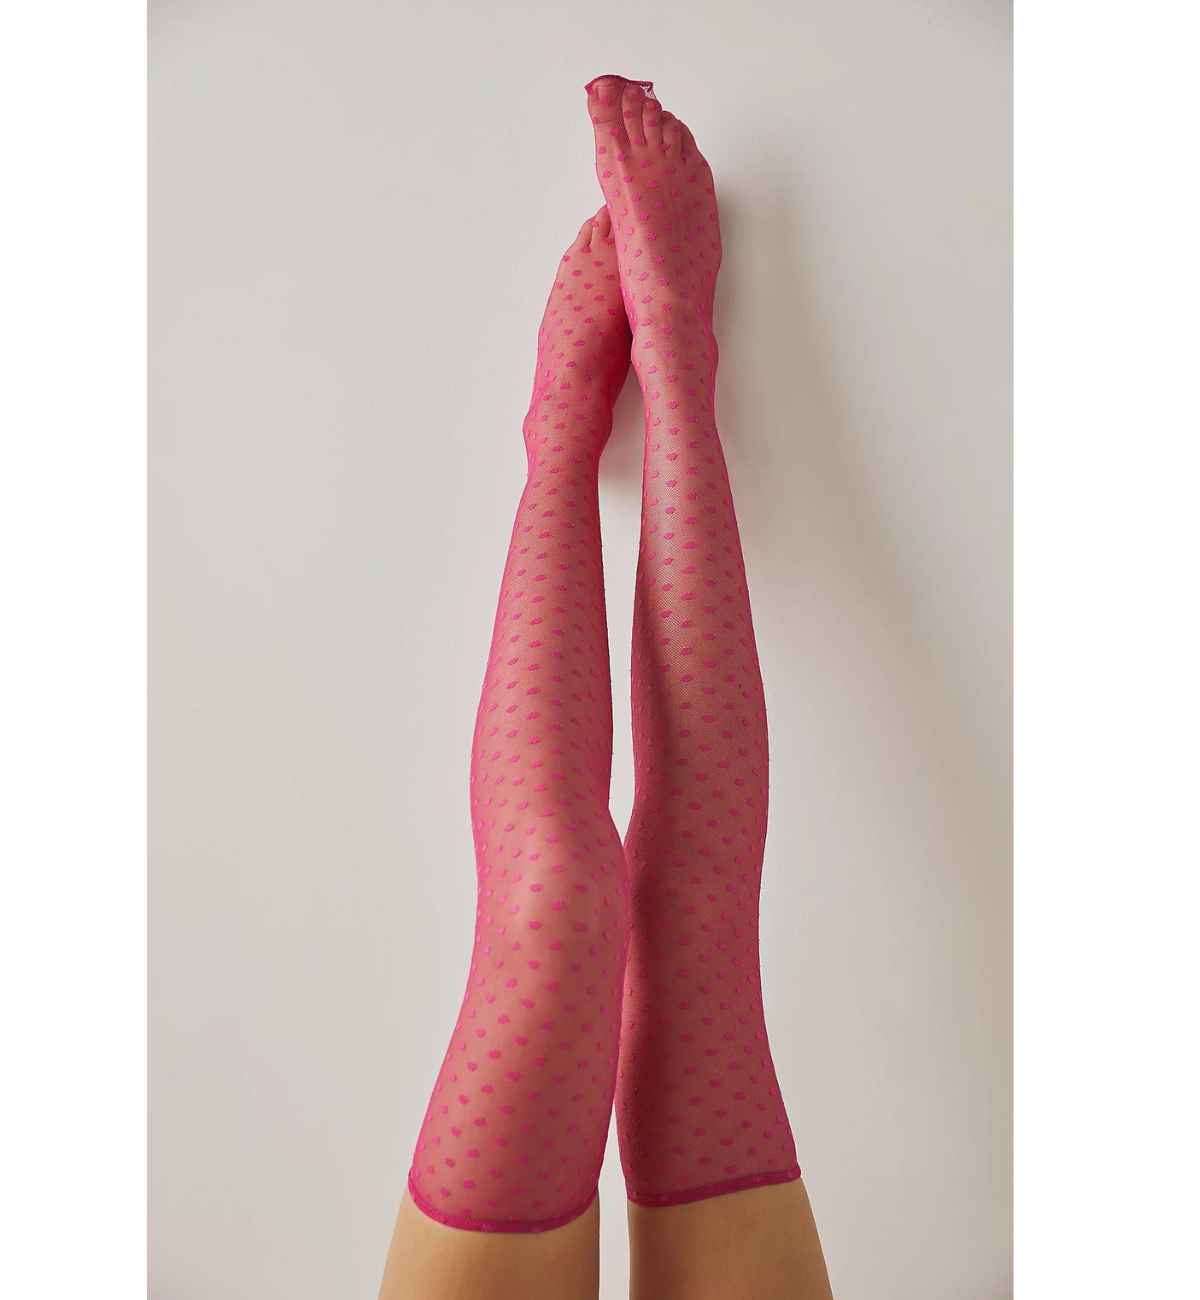 Women wearing pink thigh high heart socks with heart pattern all over on beige background.